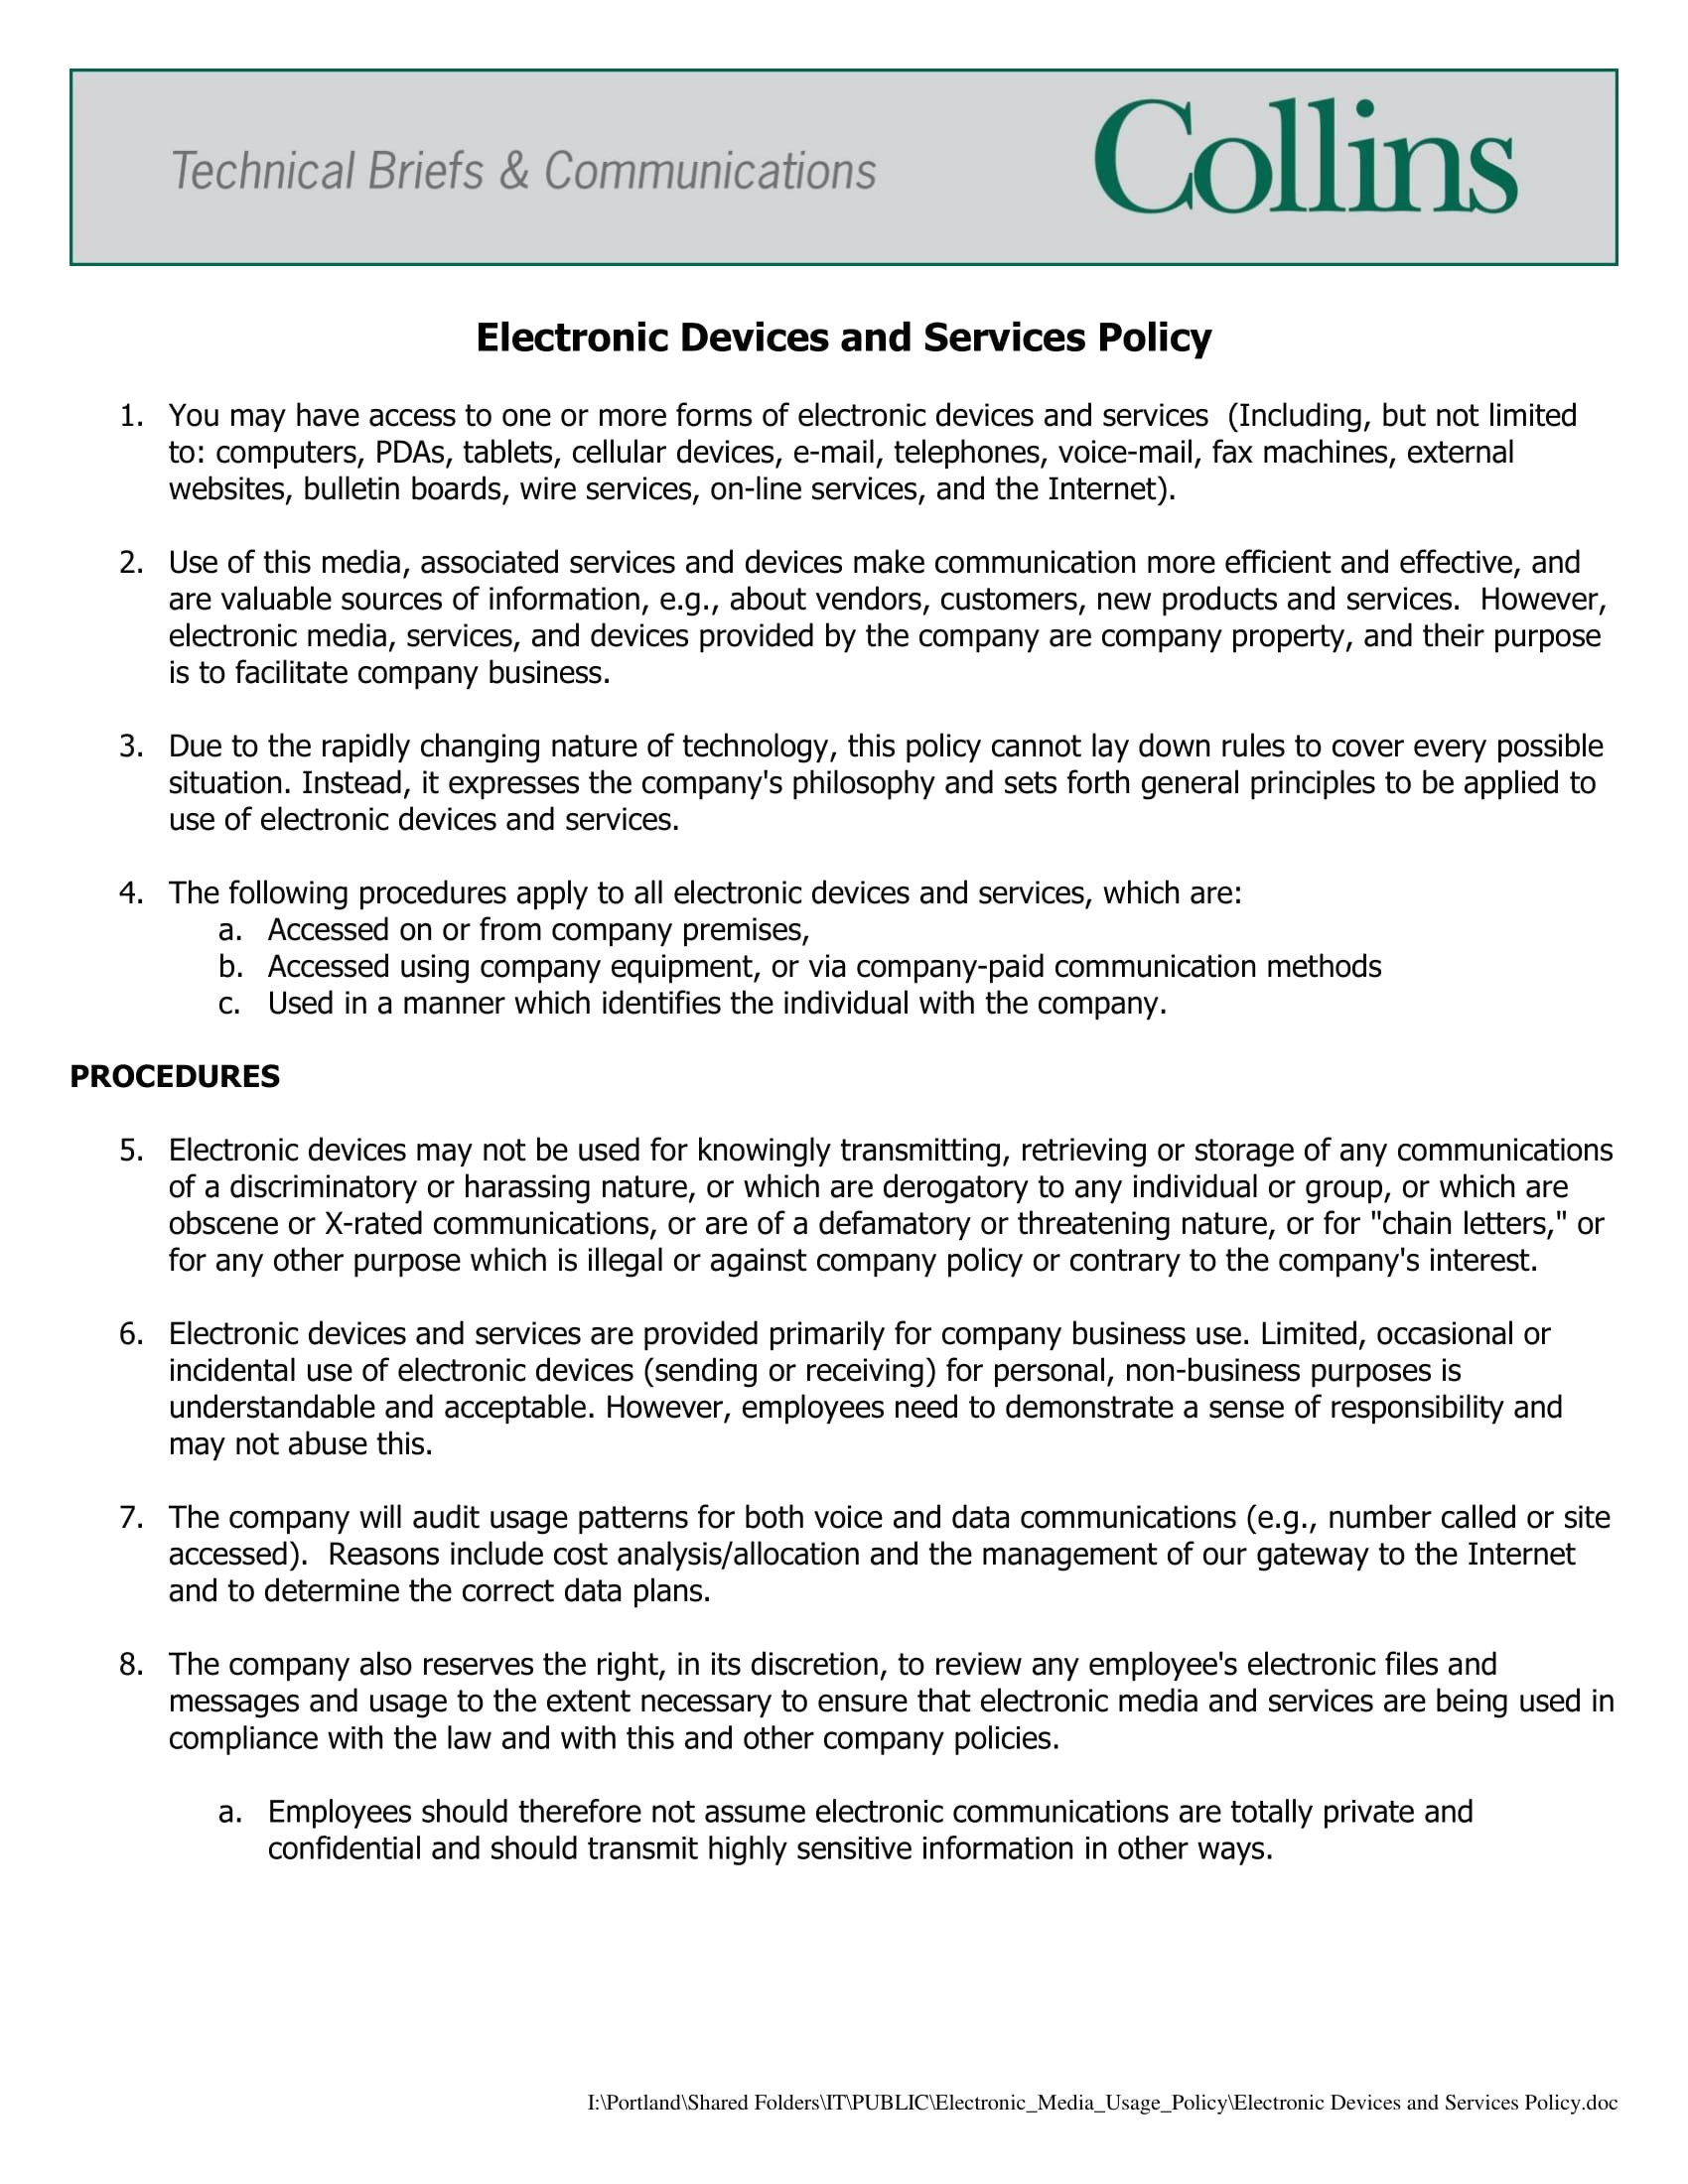 Email Usage Policy Template 15 Employee Email Policy Examples Pdf Google Doc